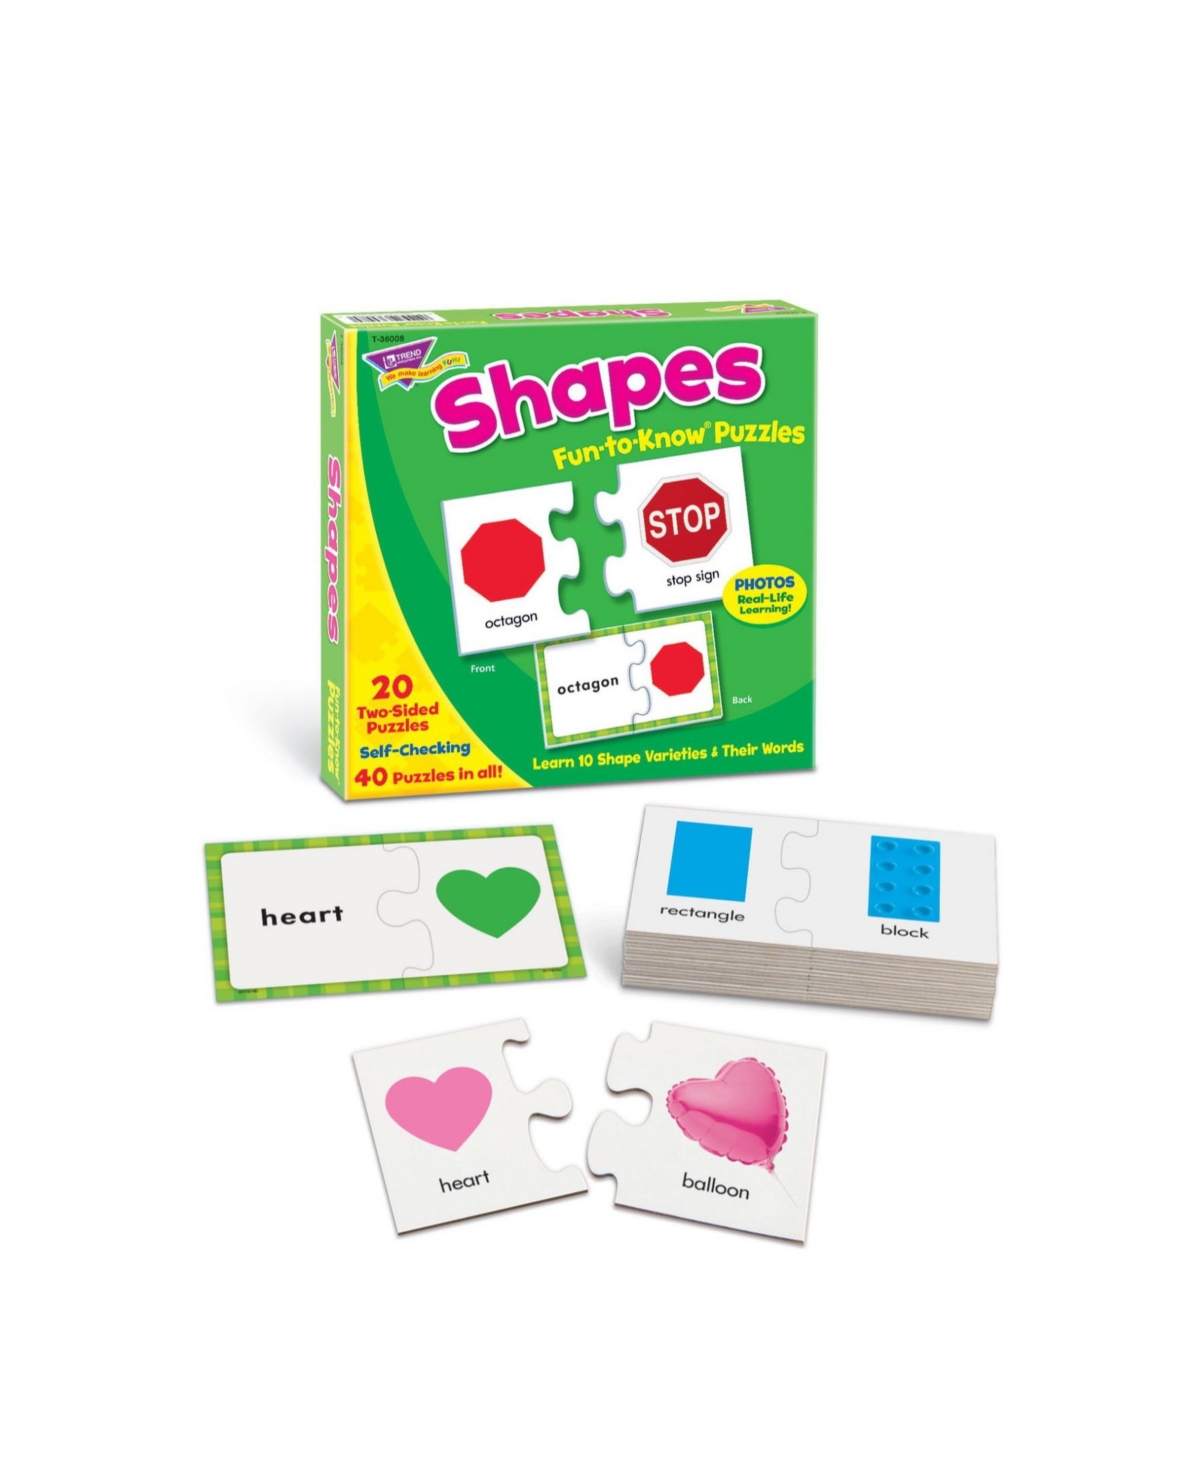 Shop Trend Enterprises Shapes Fun-to-know Puzzles In Open Misce